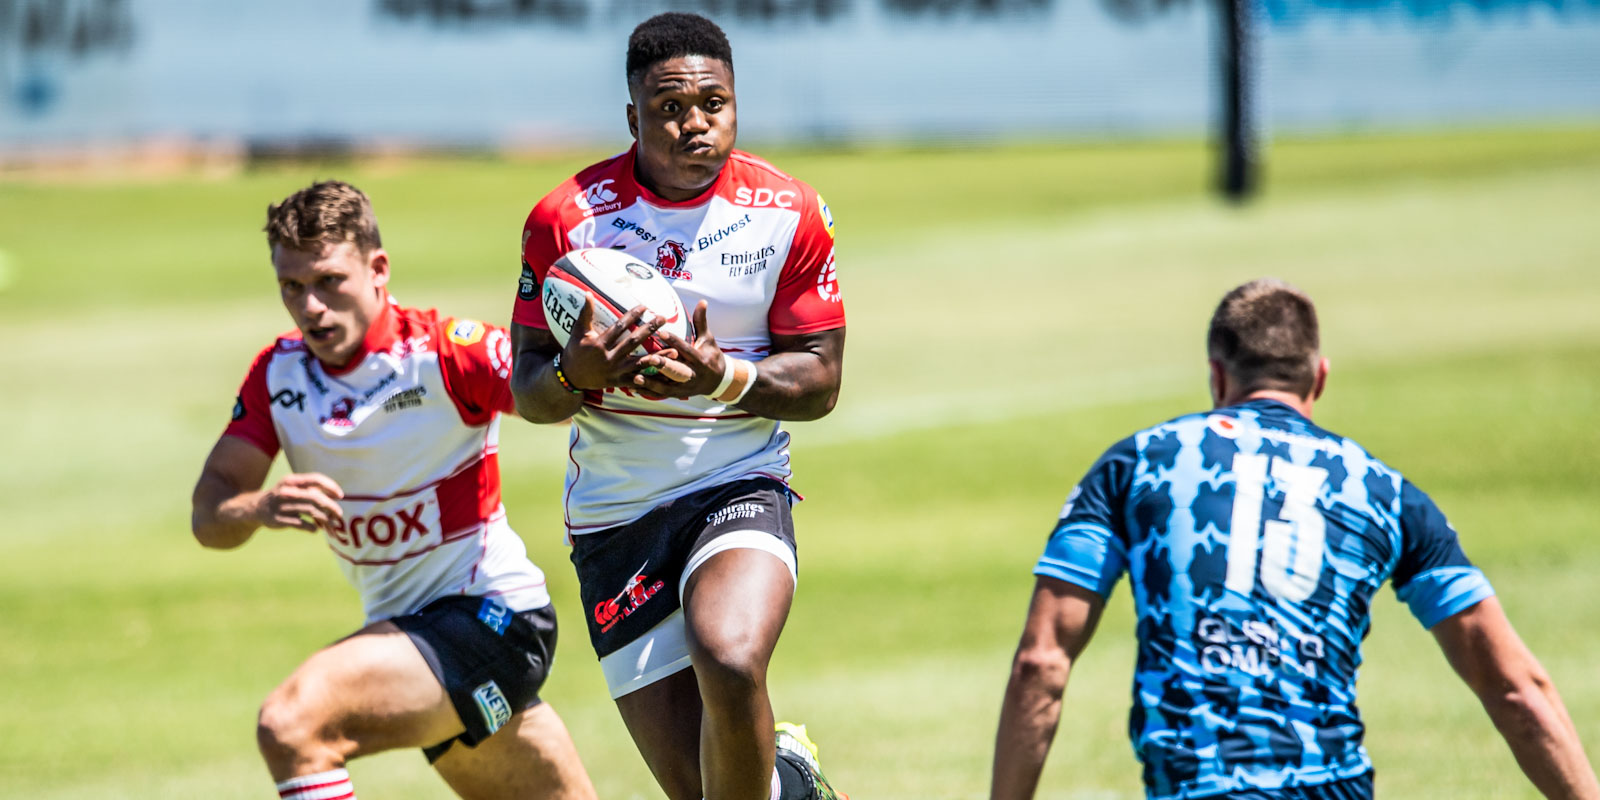 Wandisile Simelane on attack for the Xerox Lions